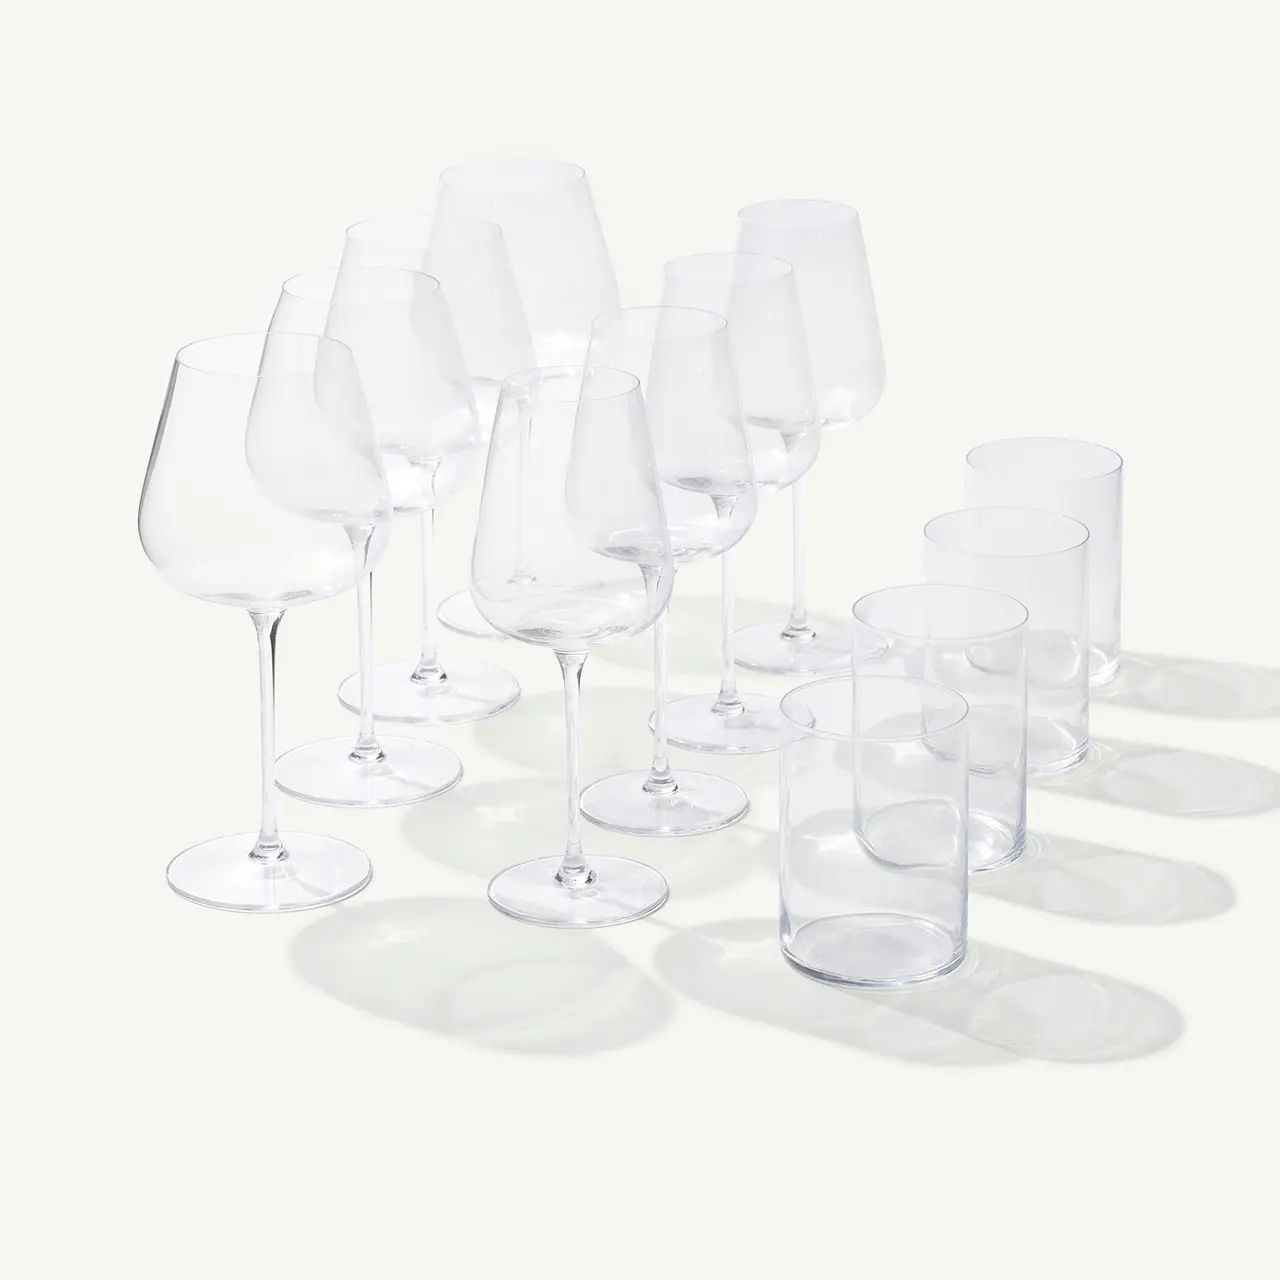 An assortment of empty wine and drinking glasses are neatly arranged on a surface, casting soft shadows under a bright light.